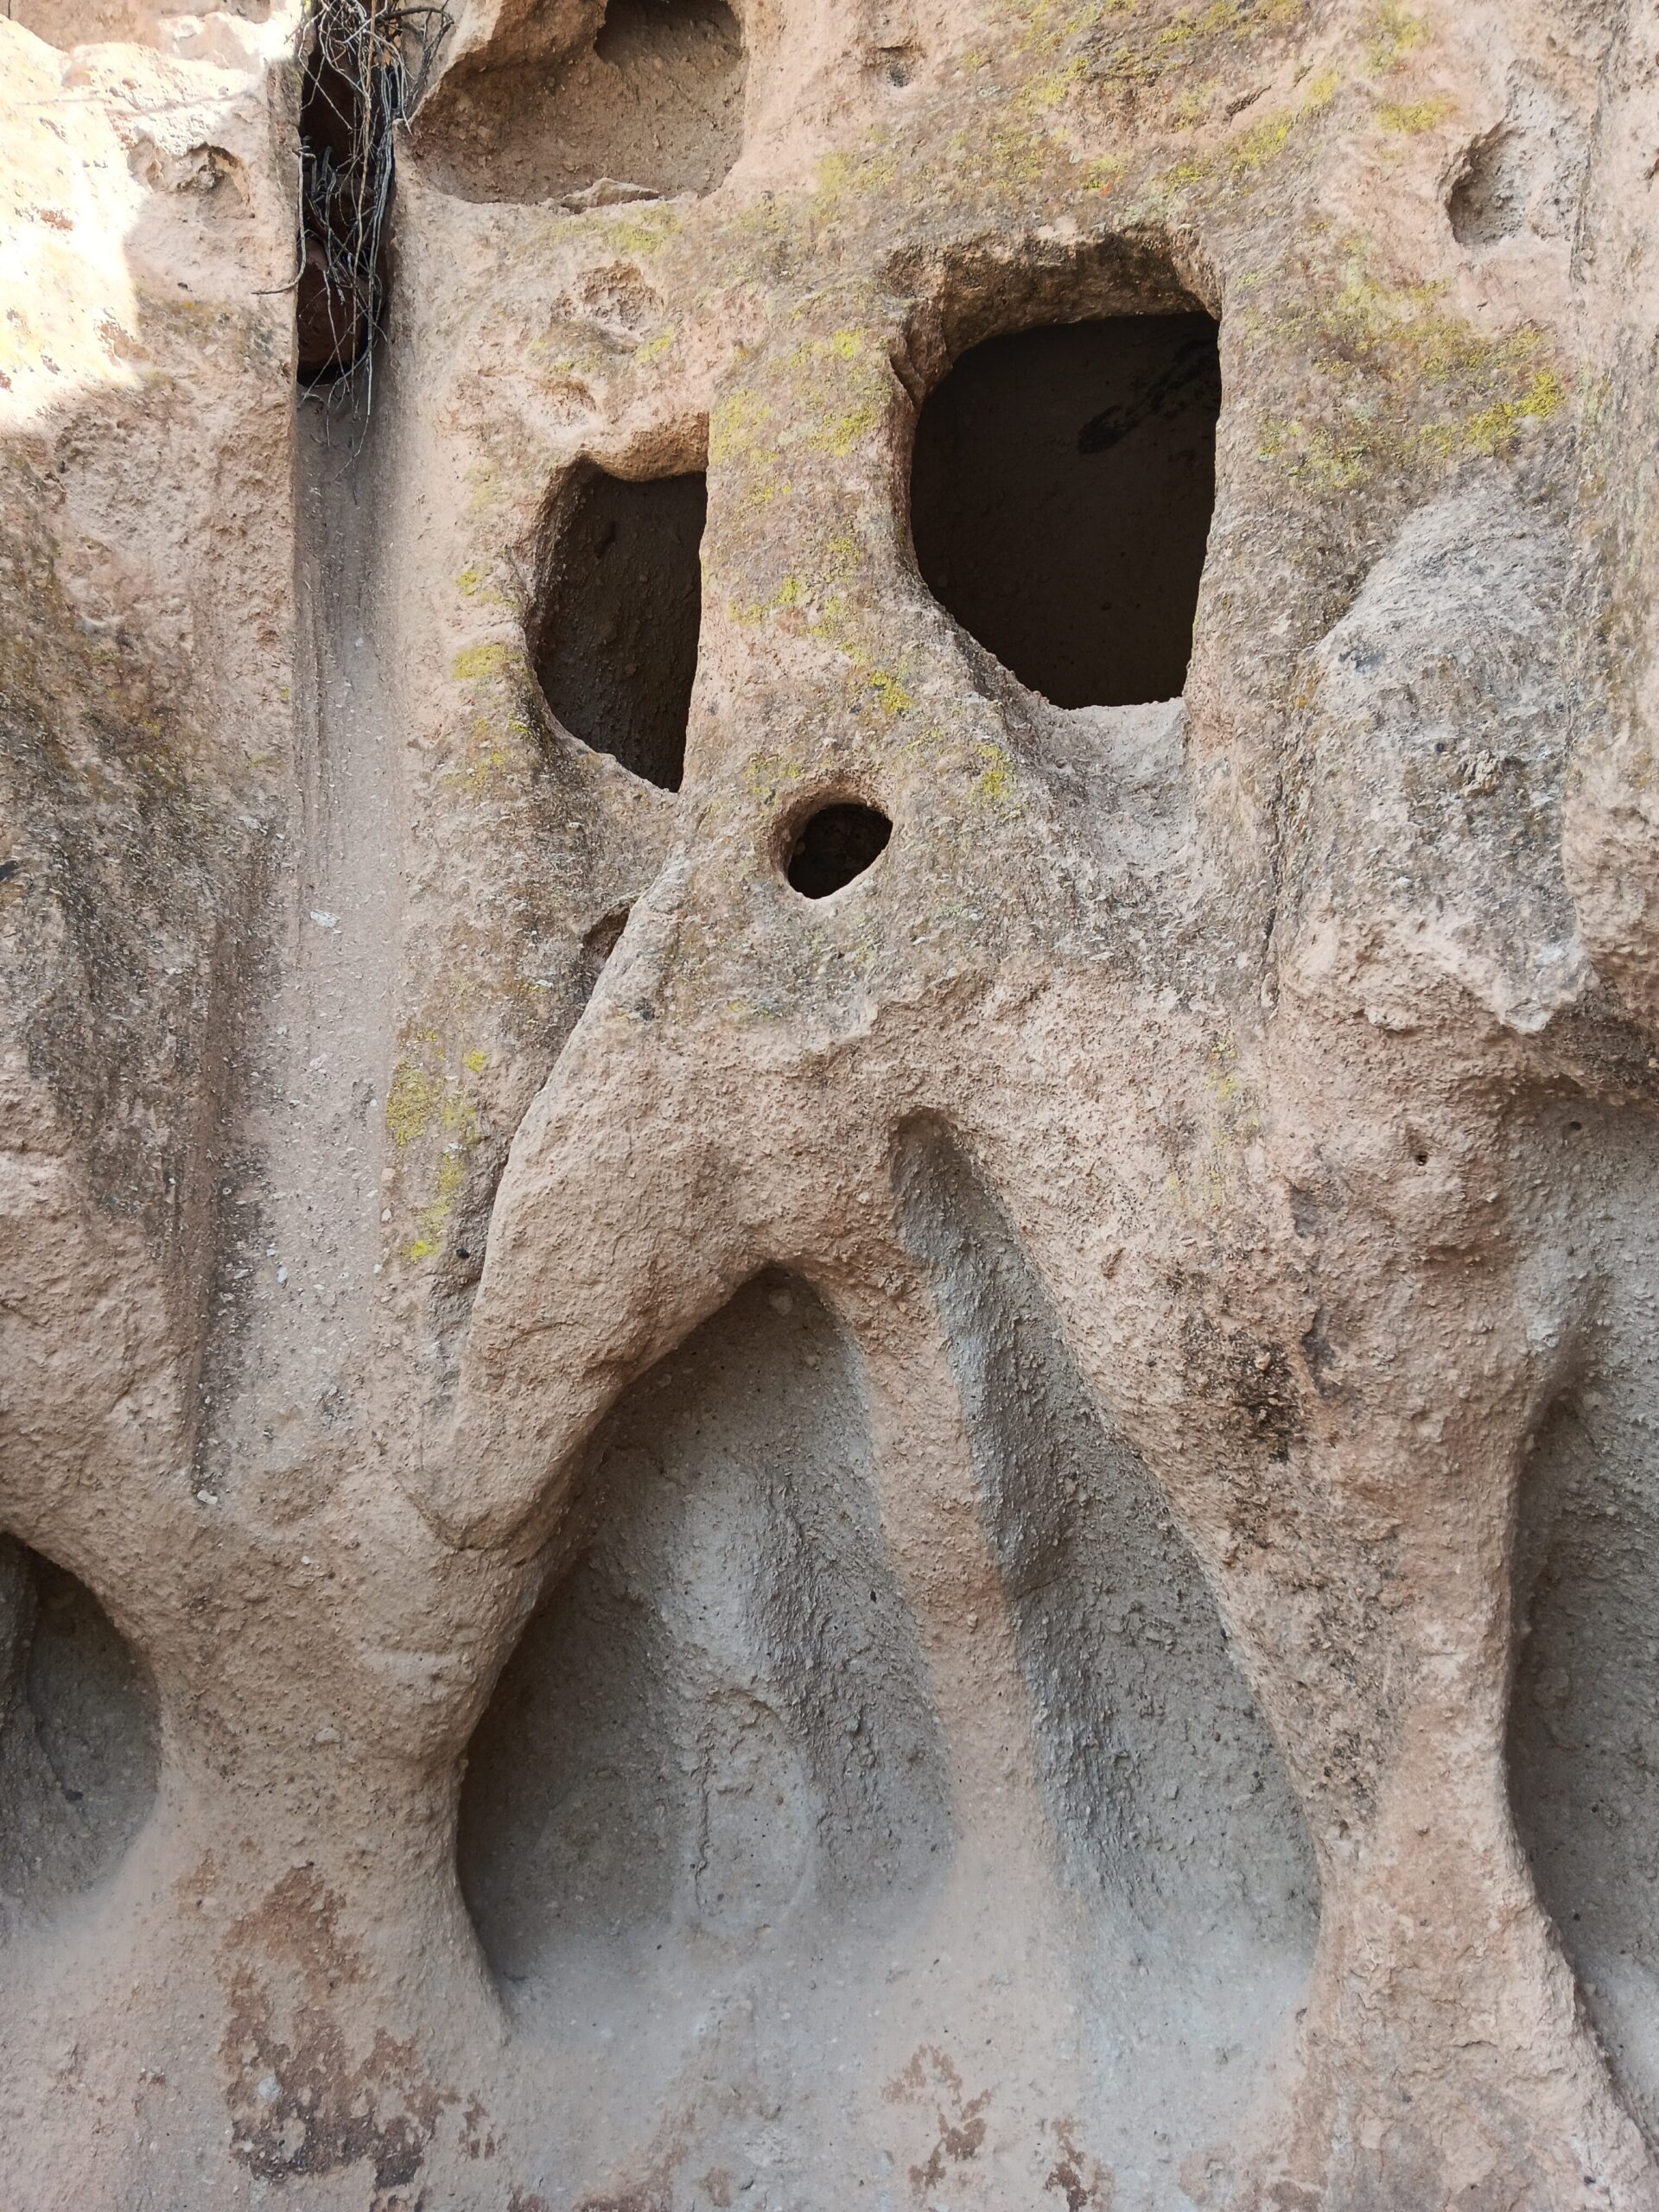 Cliff face with holes looking like a ghost face